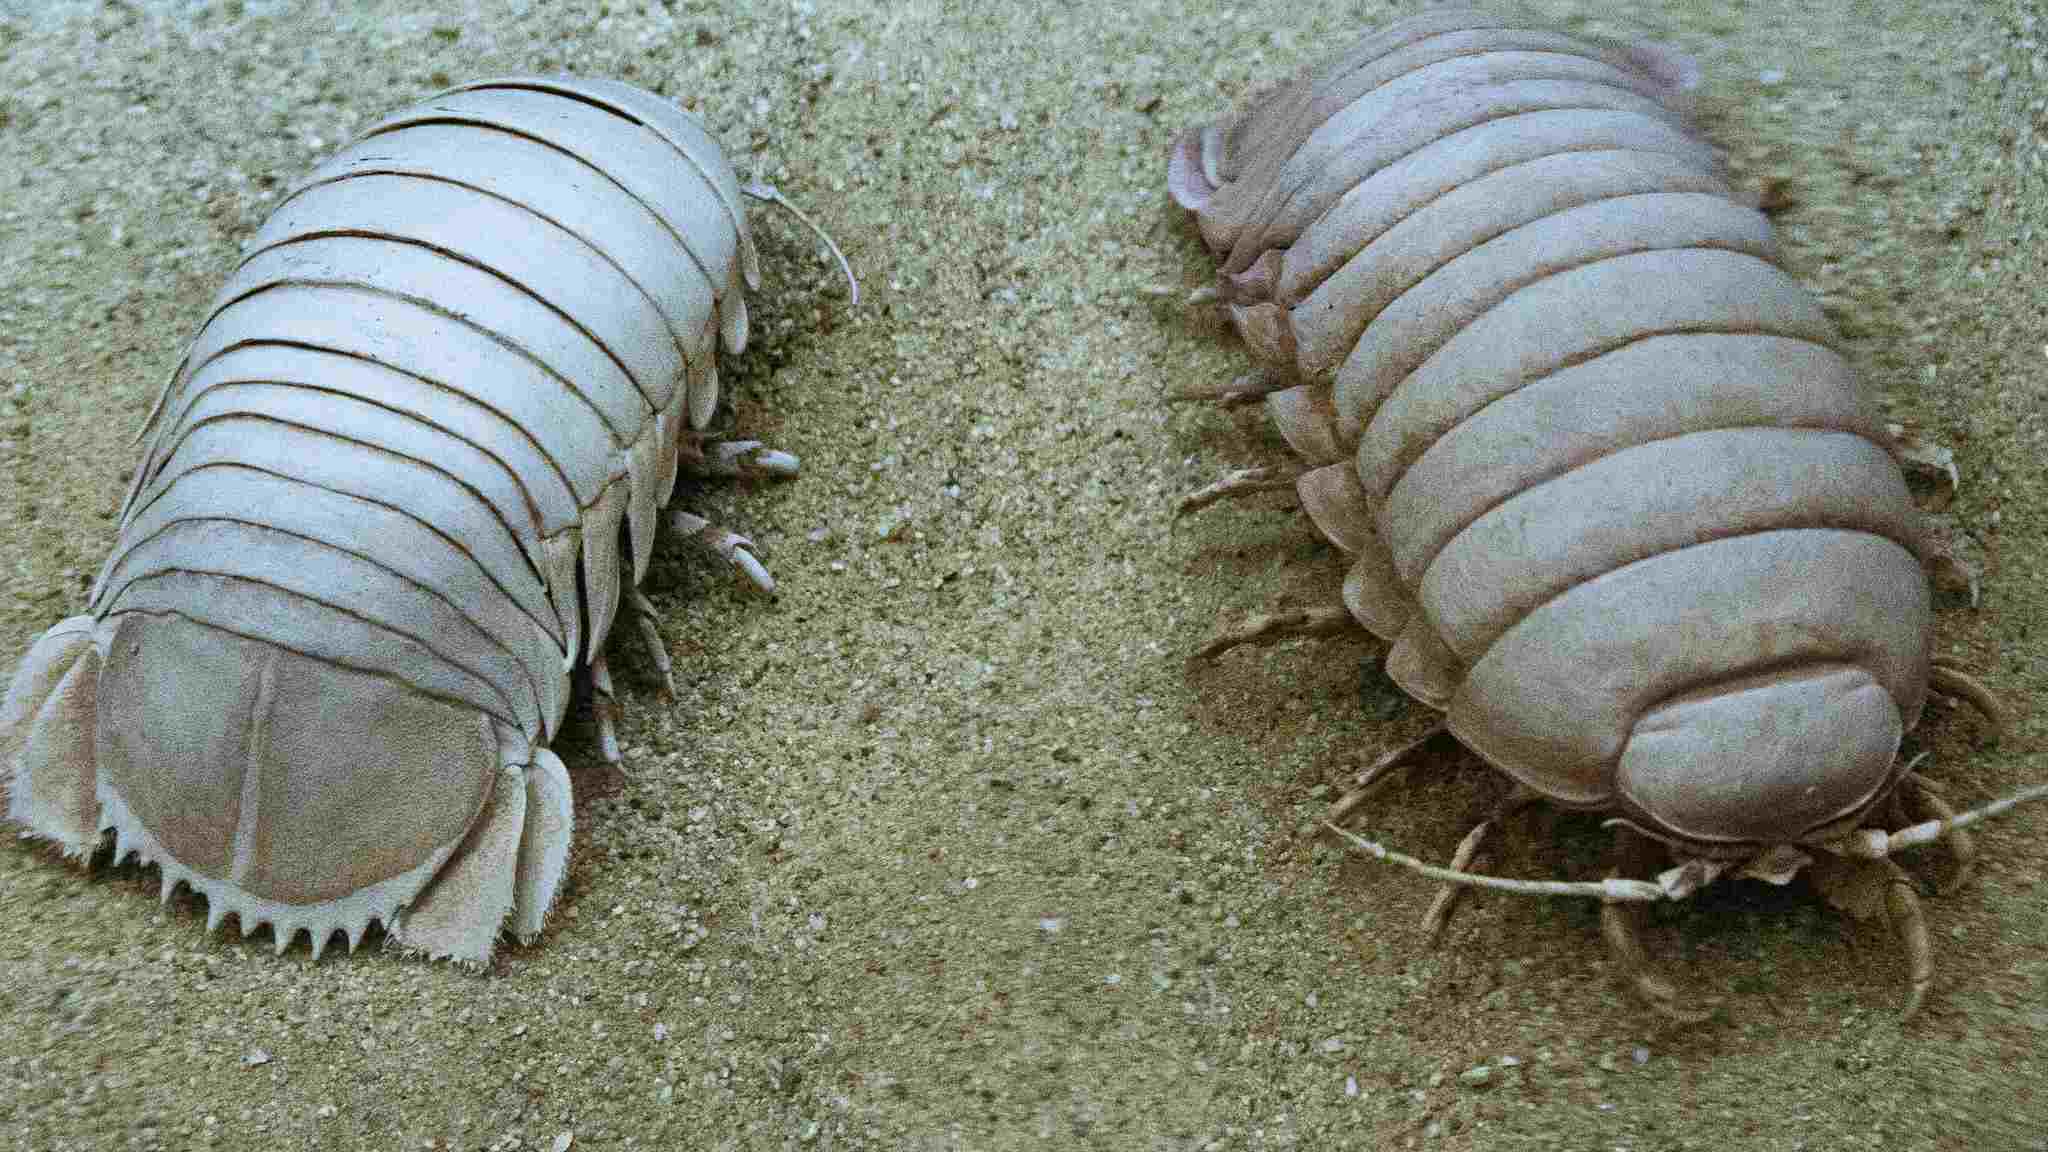 Decomposers in the Ocean: Detritivores like Giant Isopods Can be Described as Secondary Marine Decomposers (Credit: Orin Zebest 2010, Uploaded Online 2011 .CC BY 2.0.)